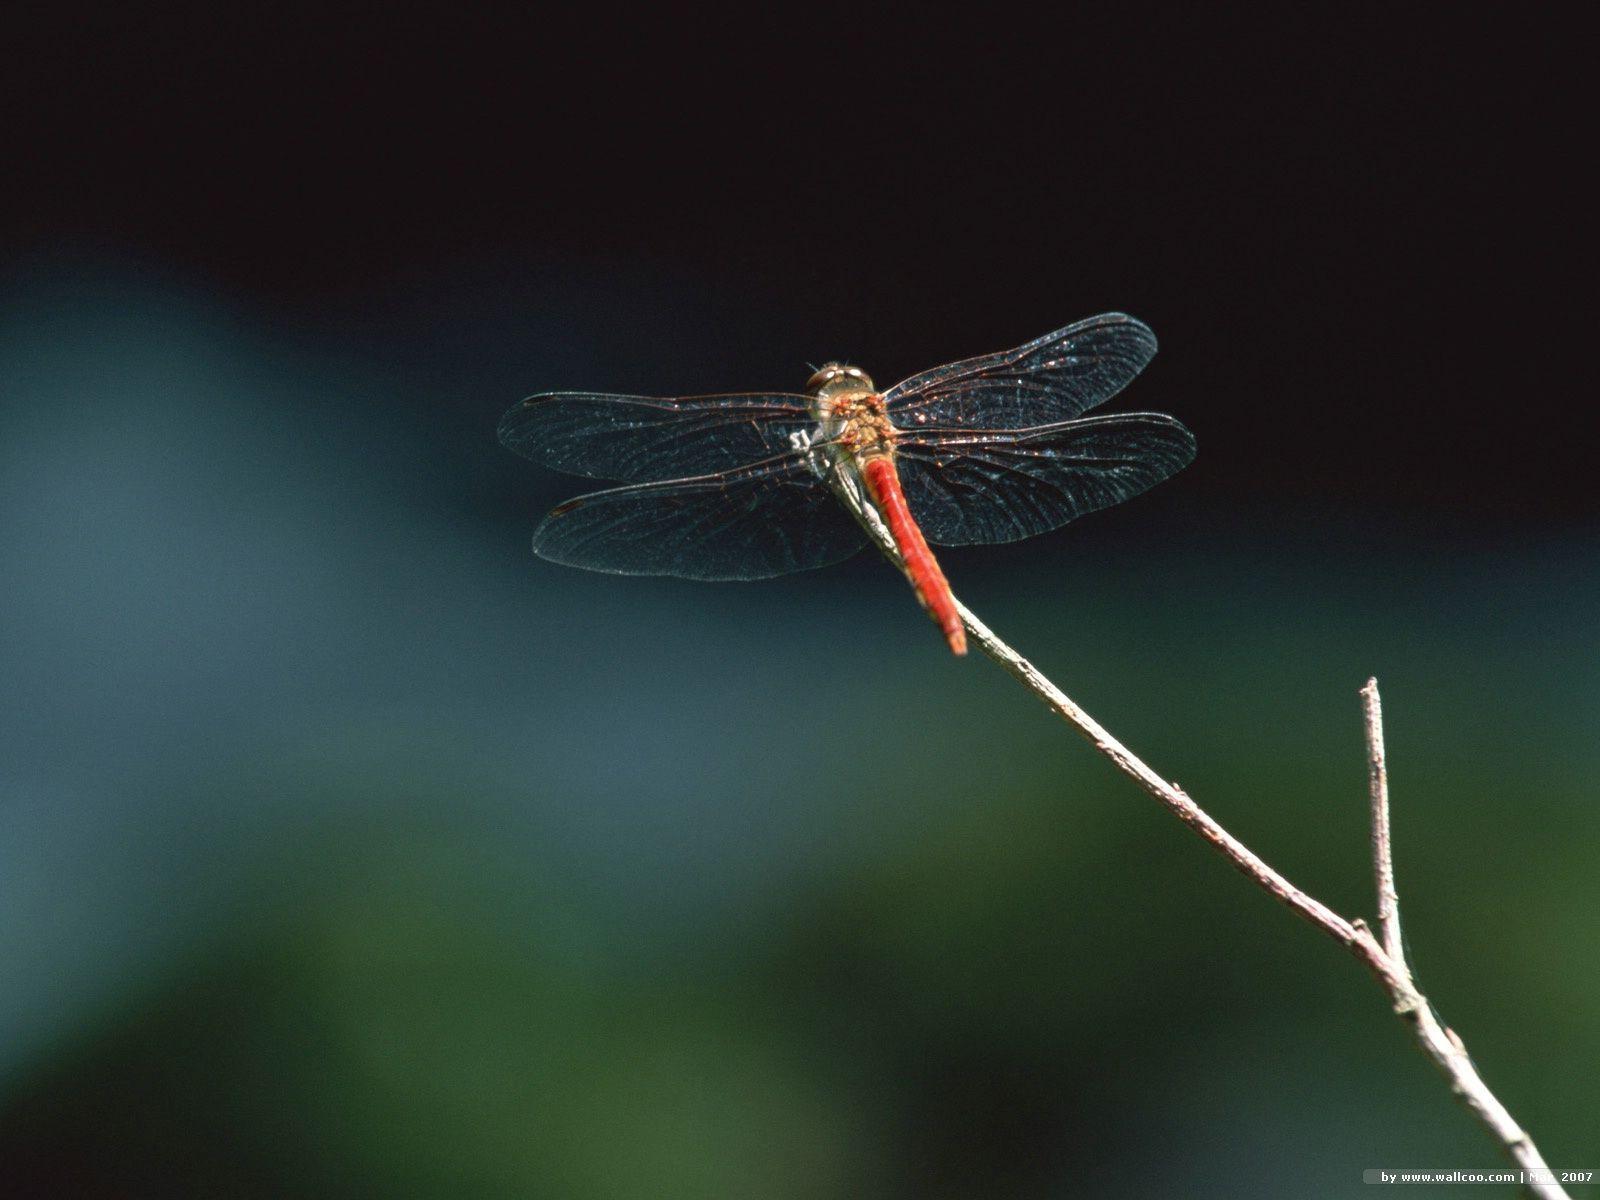 Animals For > Dragonfly Wallpaper